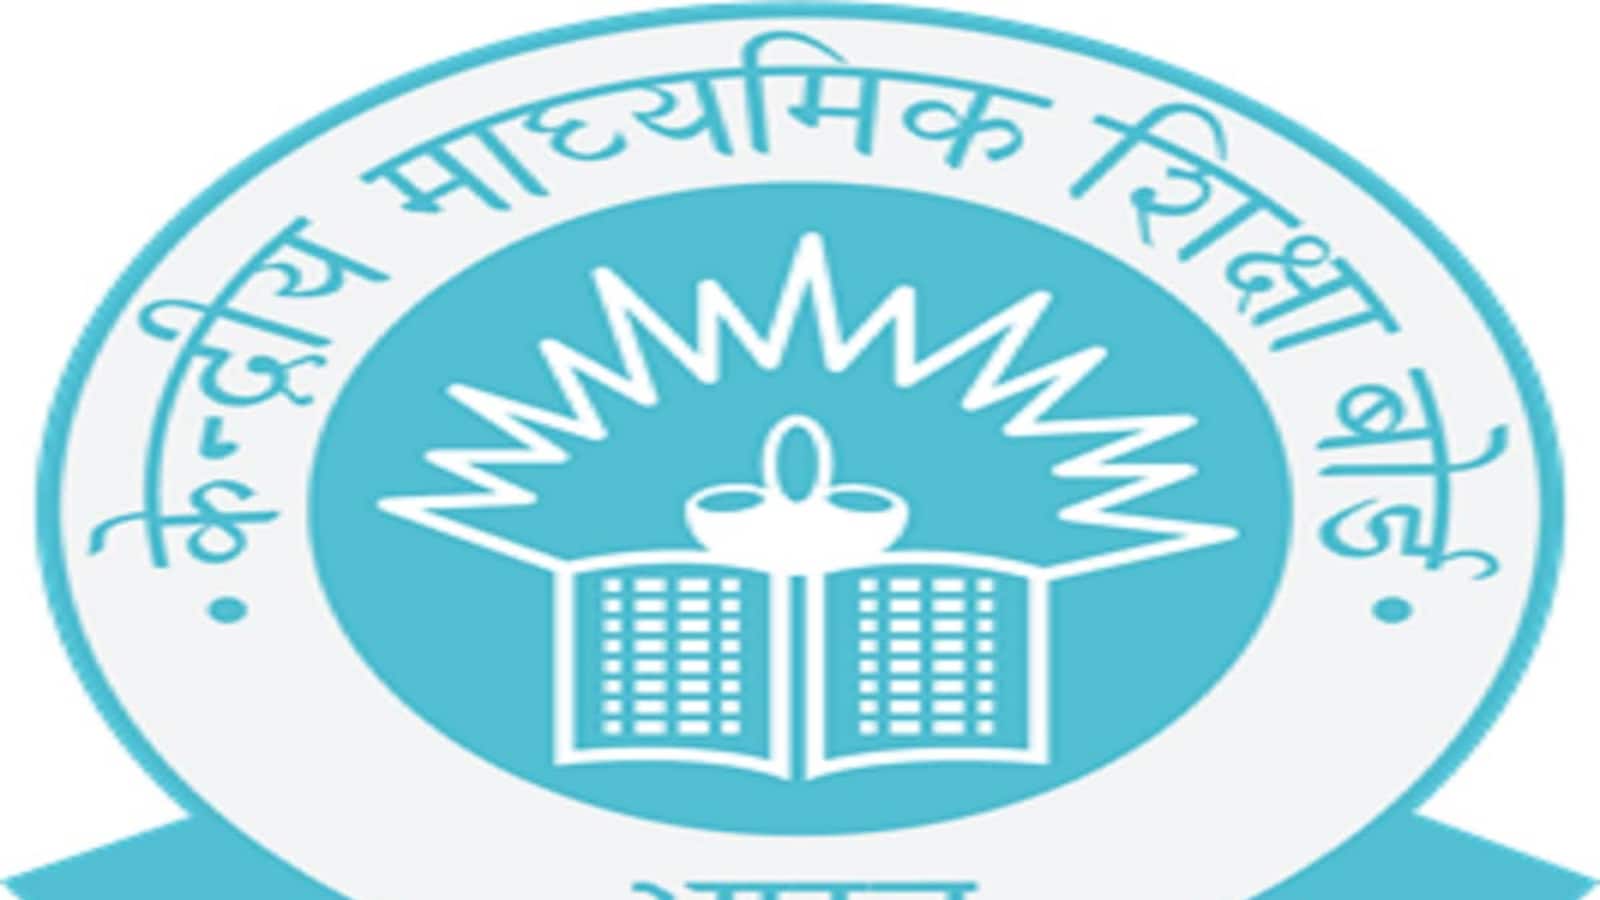 CBSE issues advisory urging public to not trust misleading information on Sample Papers, Curriculum in circulation